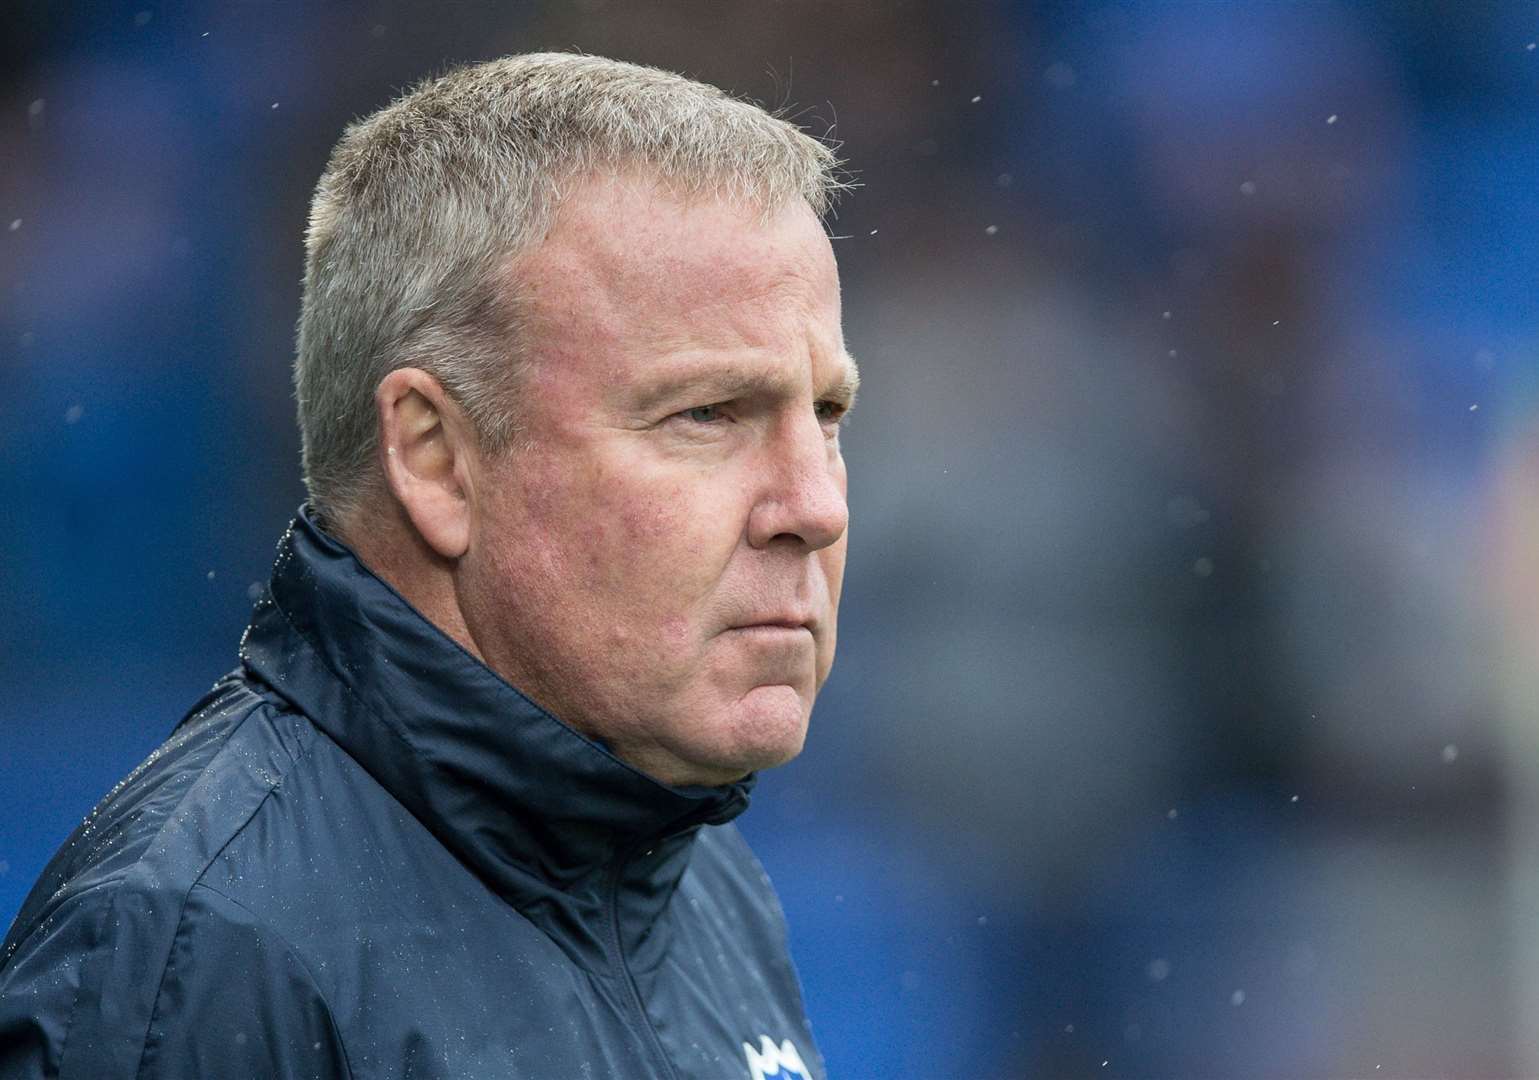 Gillingham’s director of football Kenny Jackett has been leading the search for a new manager